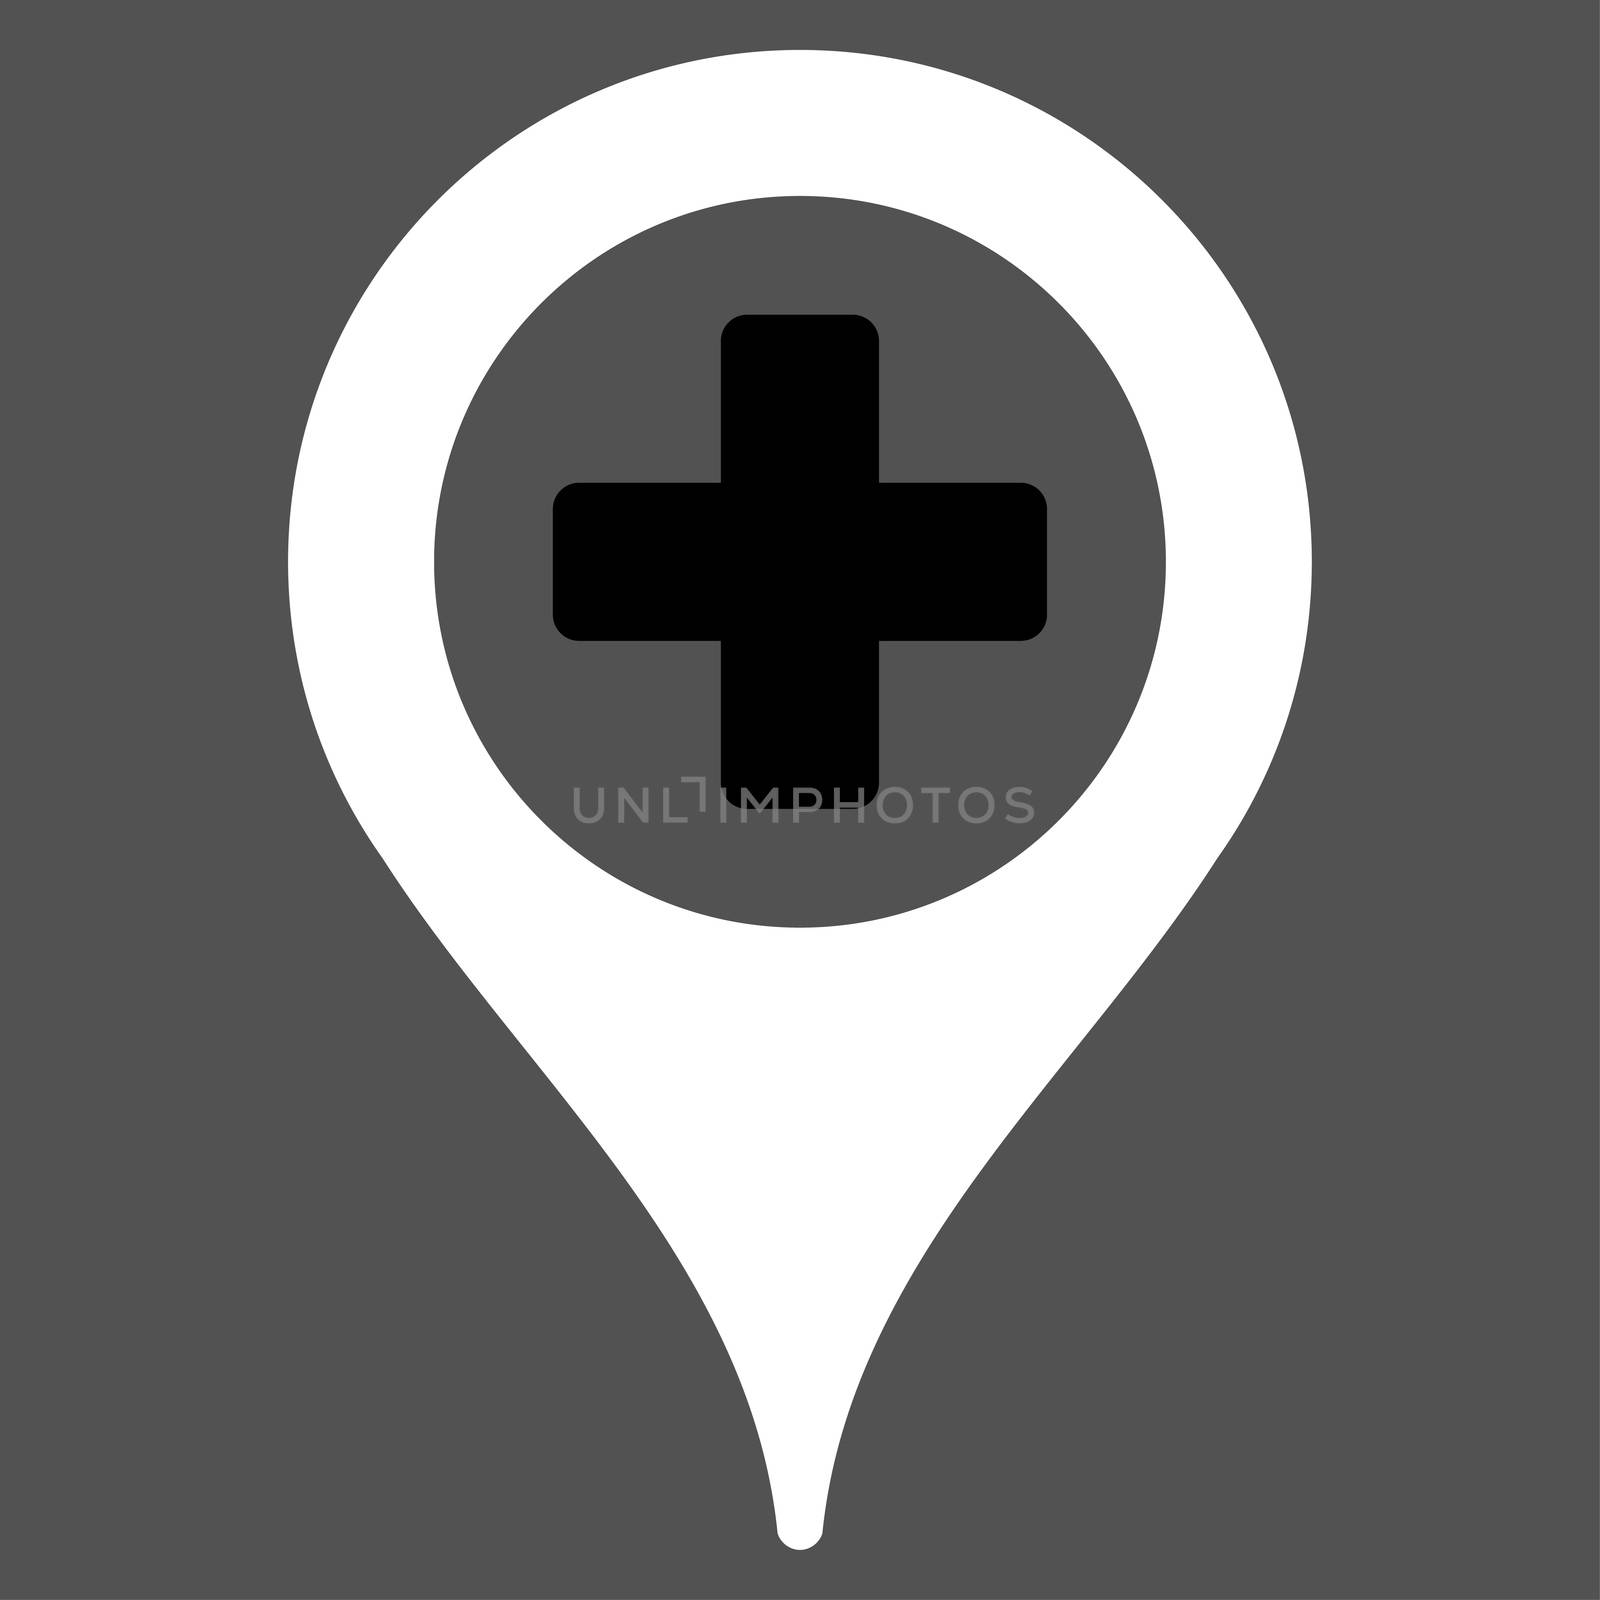 Hospital Map Pointer raster icon. Style is bicolor flat symbol, black and white colors, rounded angles, gray background.